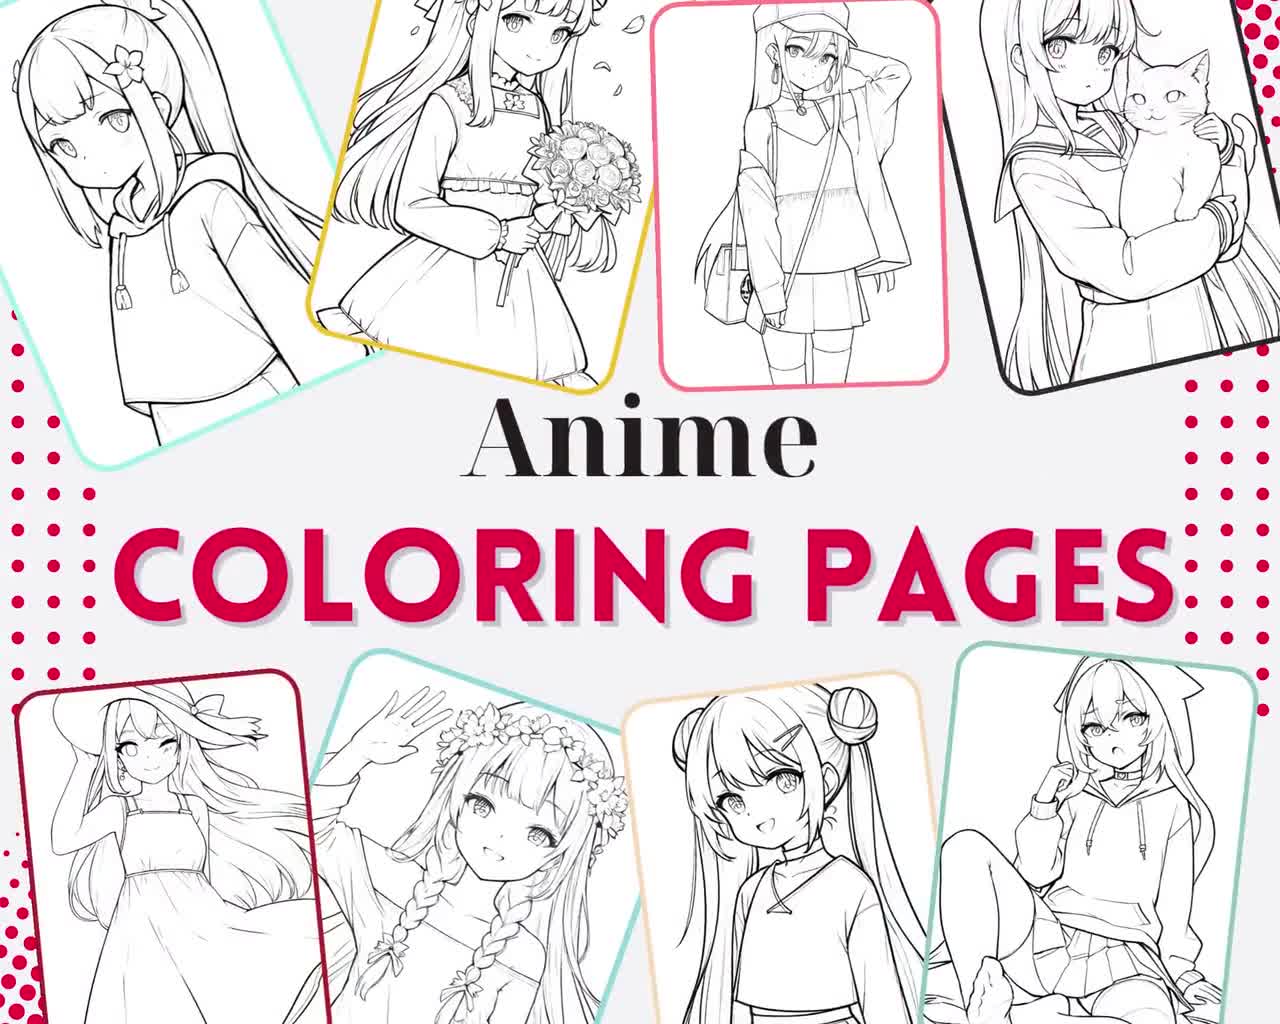 Kawaii Girls: A Cute Anime Coloring Book for Adults and Teens: Relax and  De-stress with These Cute Anime Girls and Their Adventures (Anime Coloring